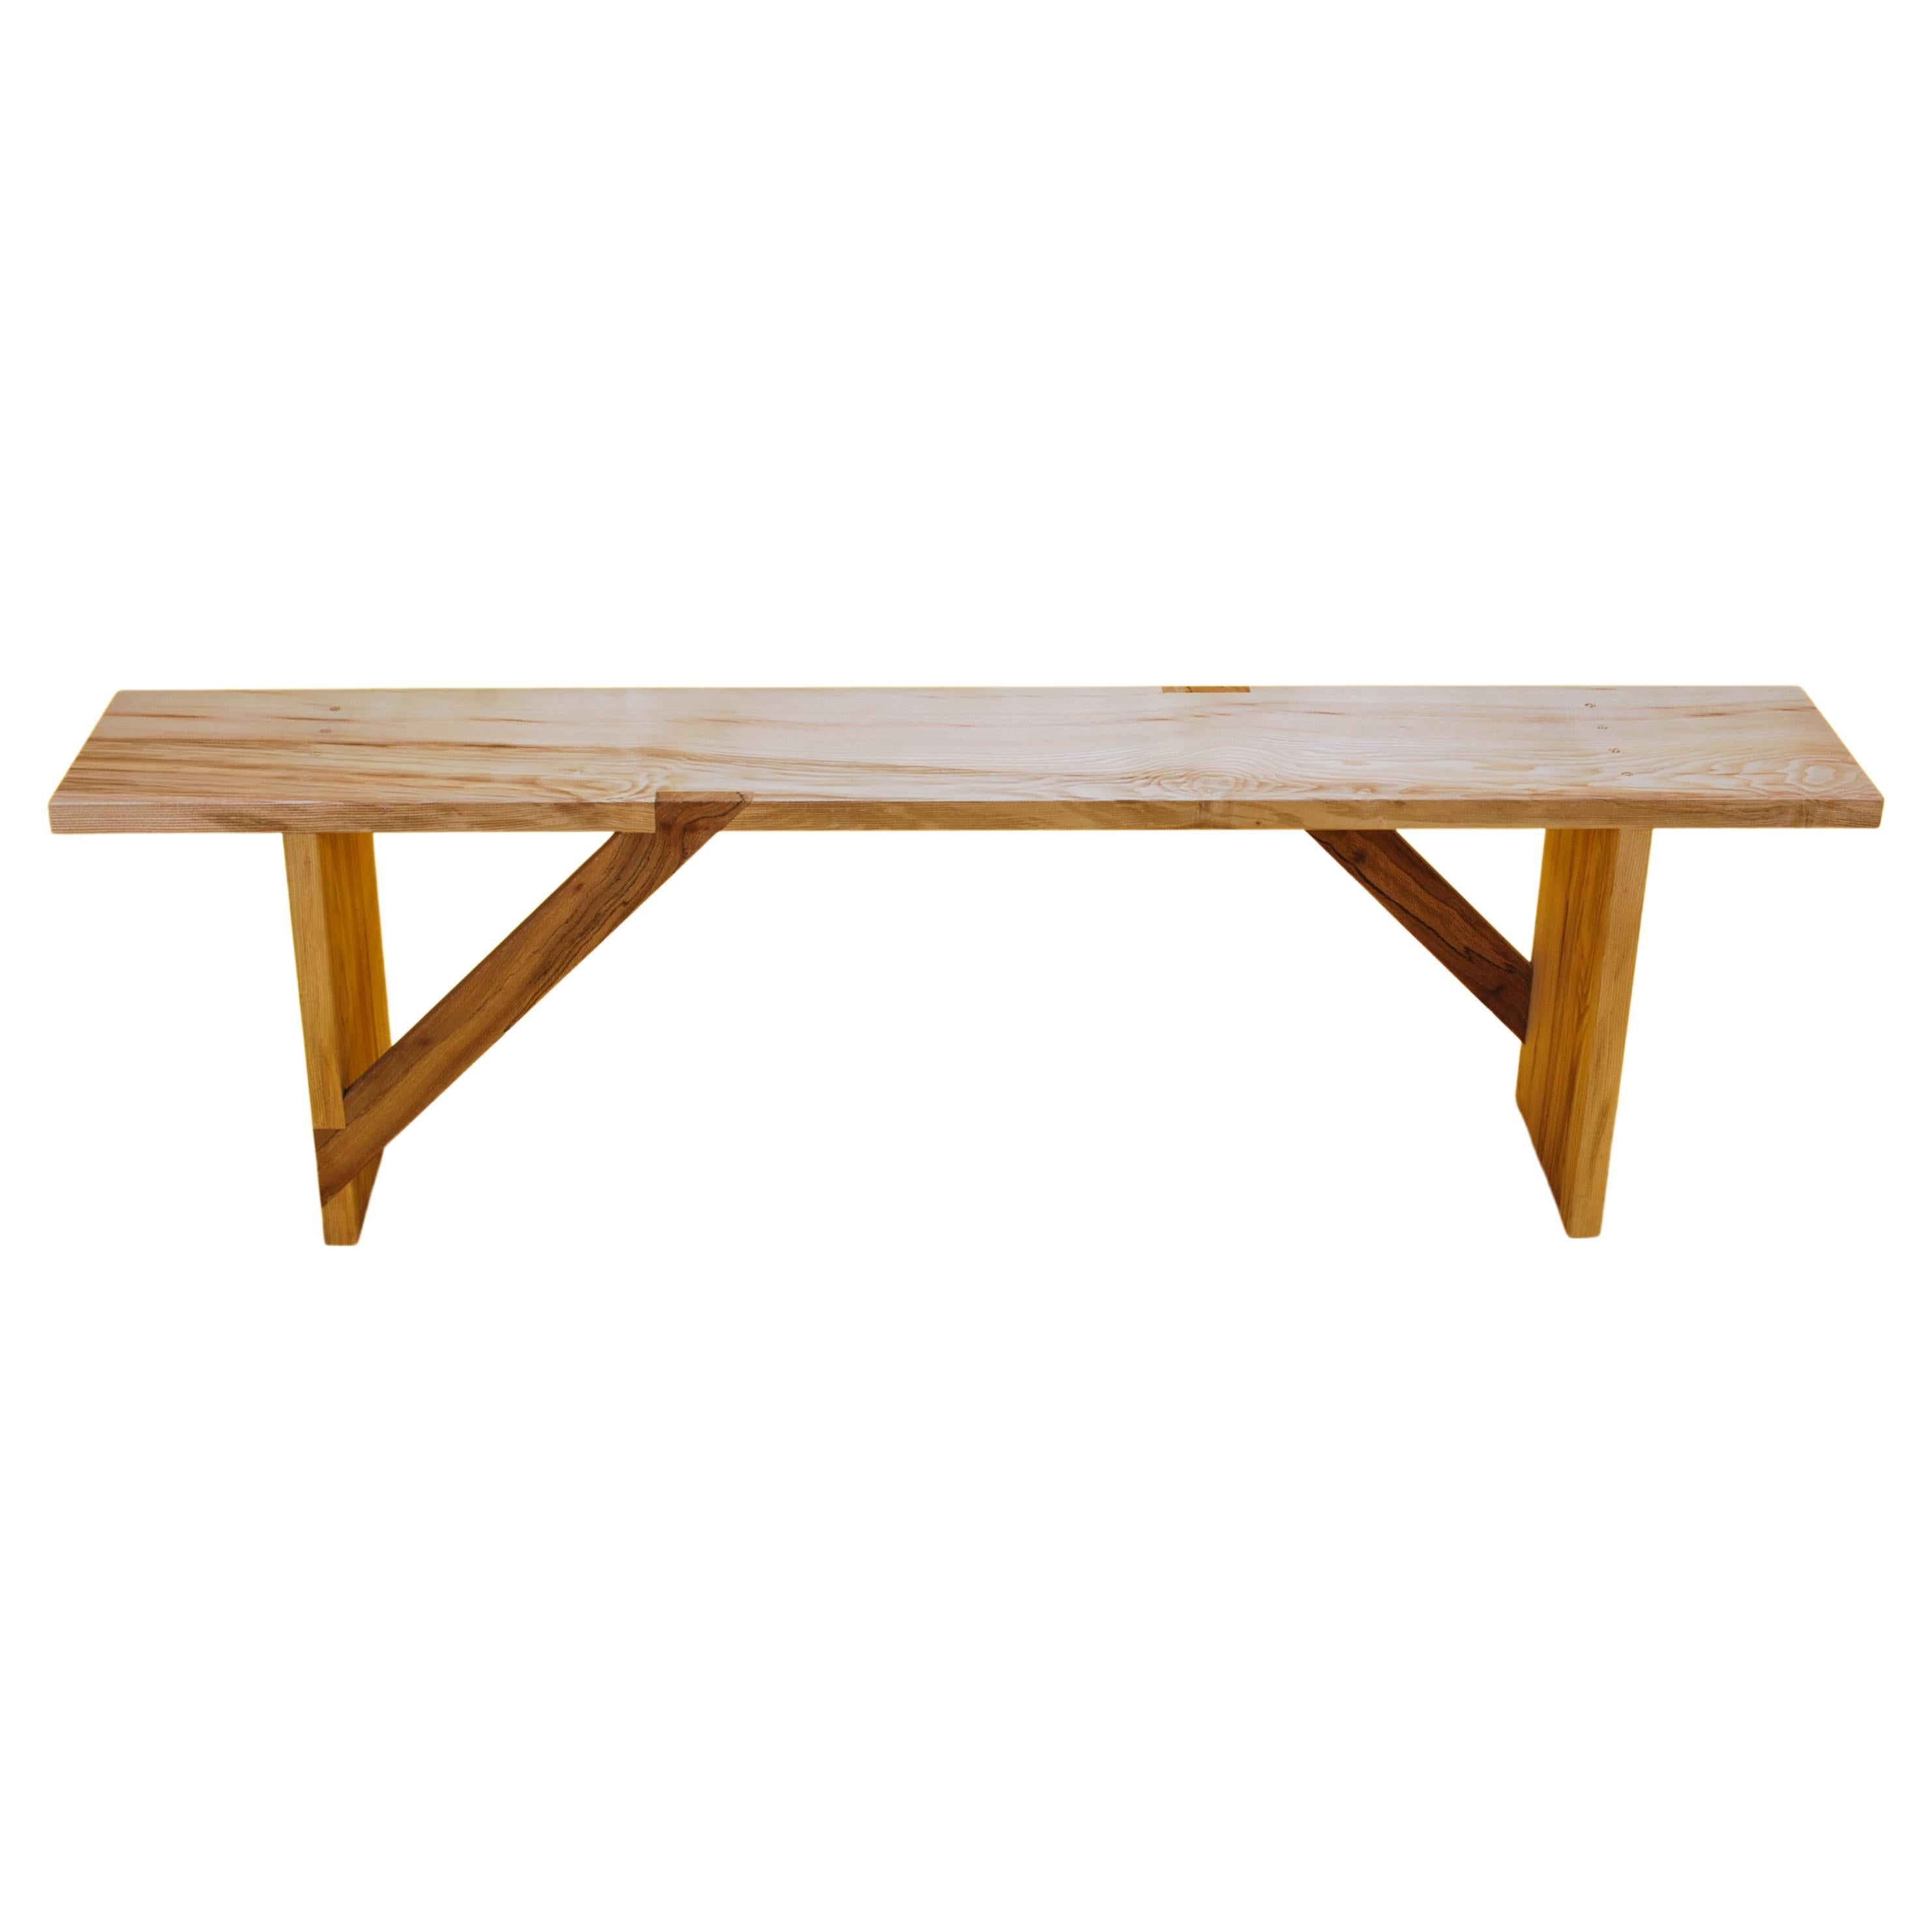 Bench in Solid English Ash and London Plane Wood Handmade in the UK Seats Three For Sale